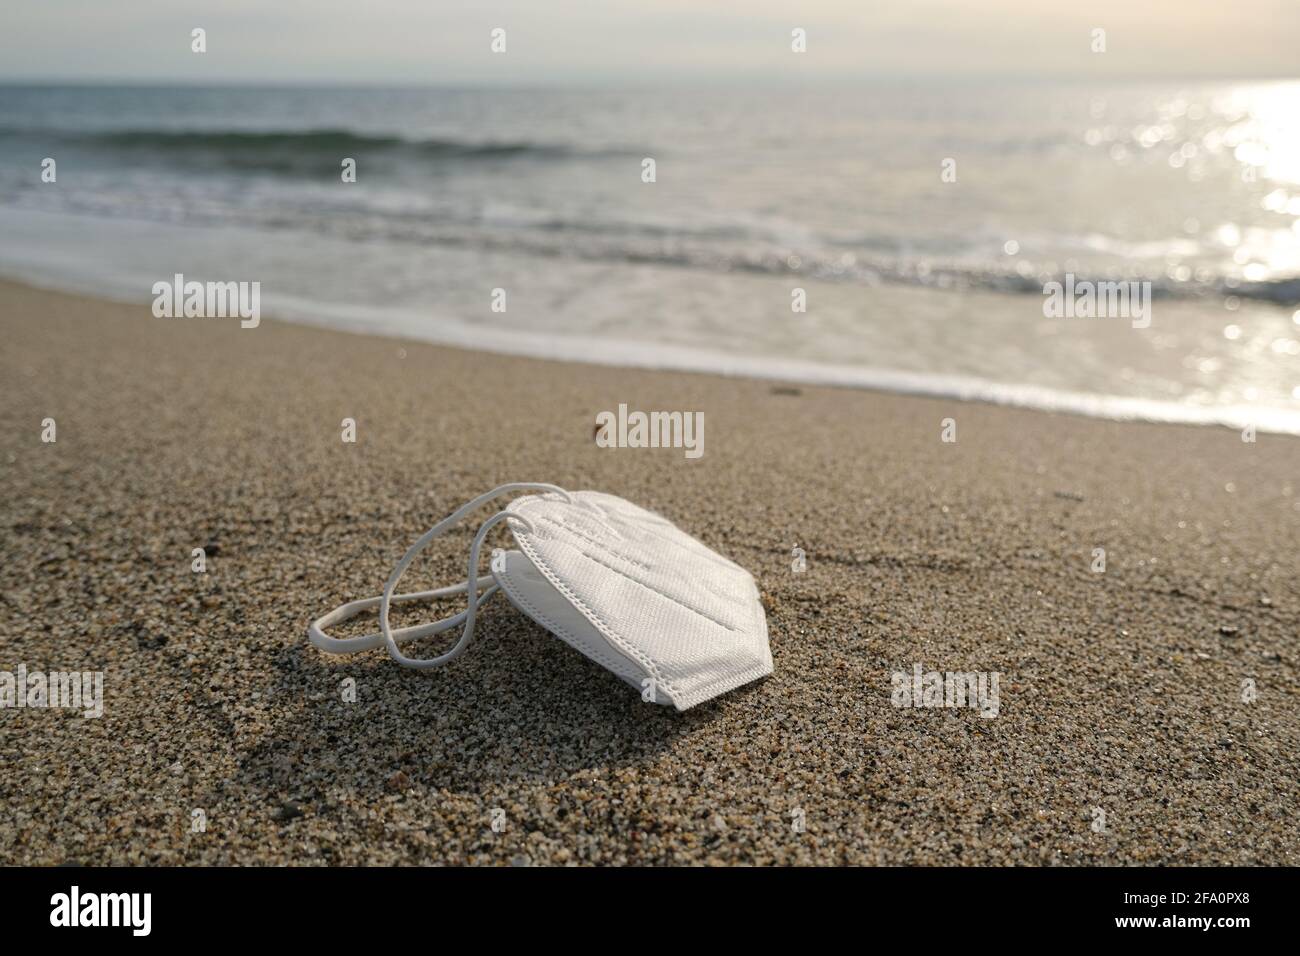 Discarded disposable face mask floating on dirty sea shore,covid19 pandemic pollution Stock Photo